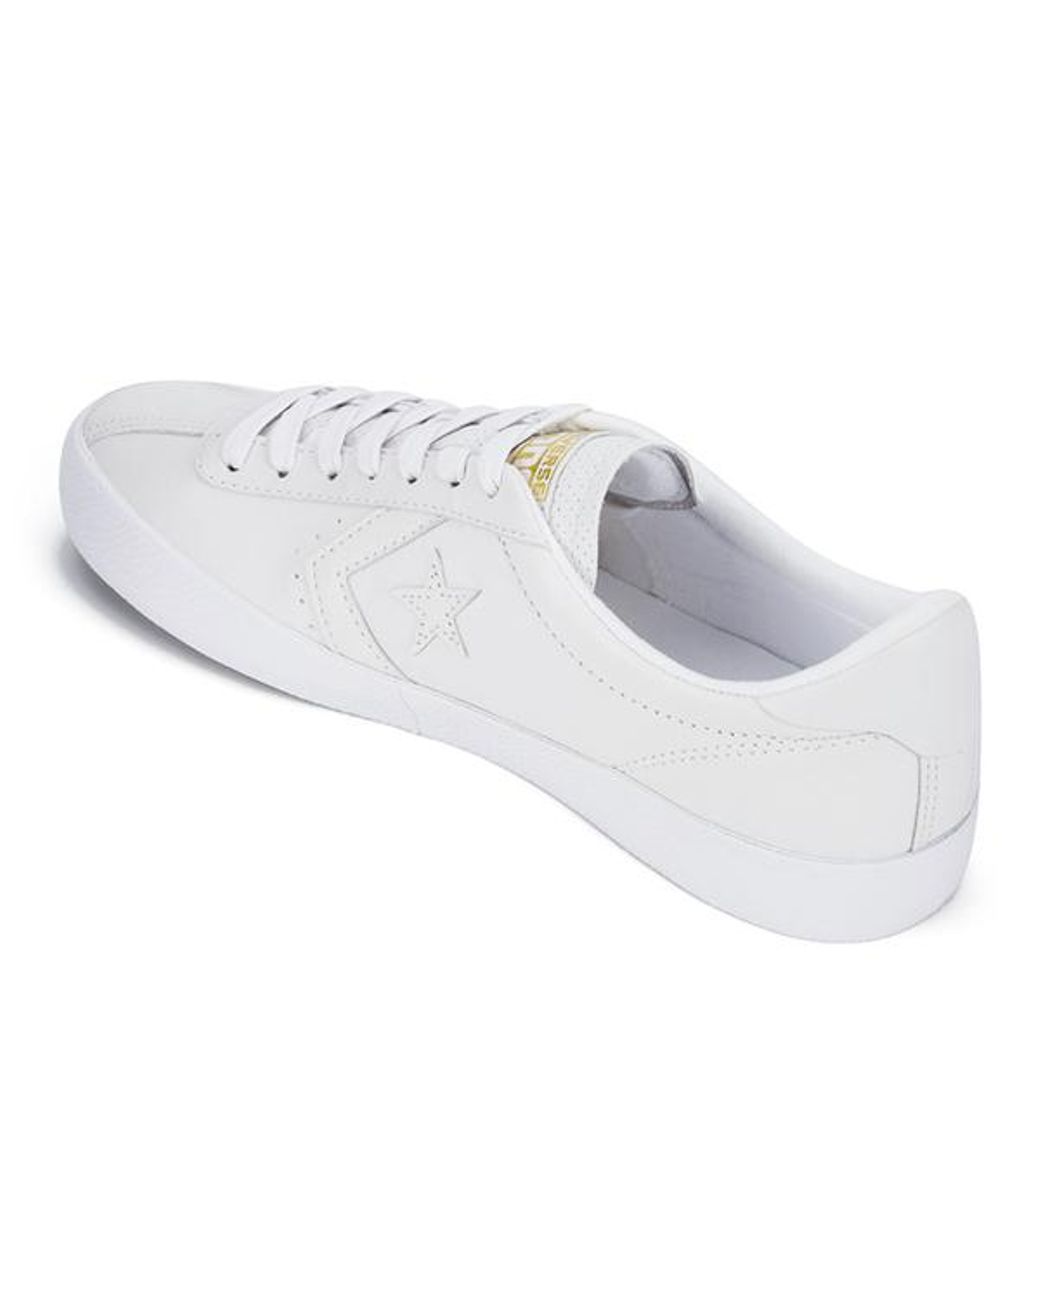 Converse Cons Breakpoint Premium Leather Trainers in White for Men | Lyst